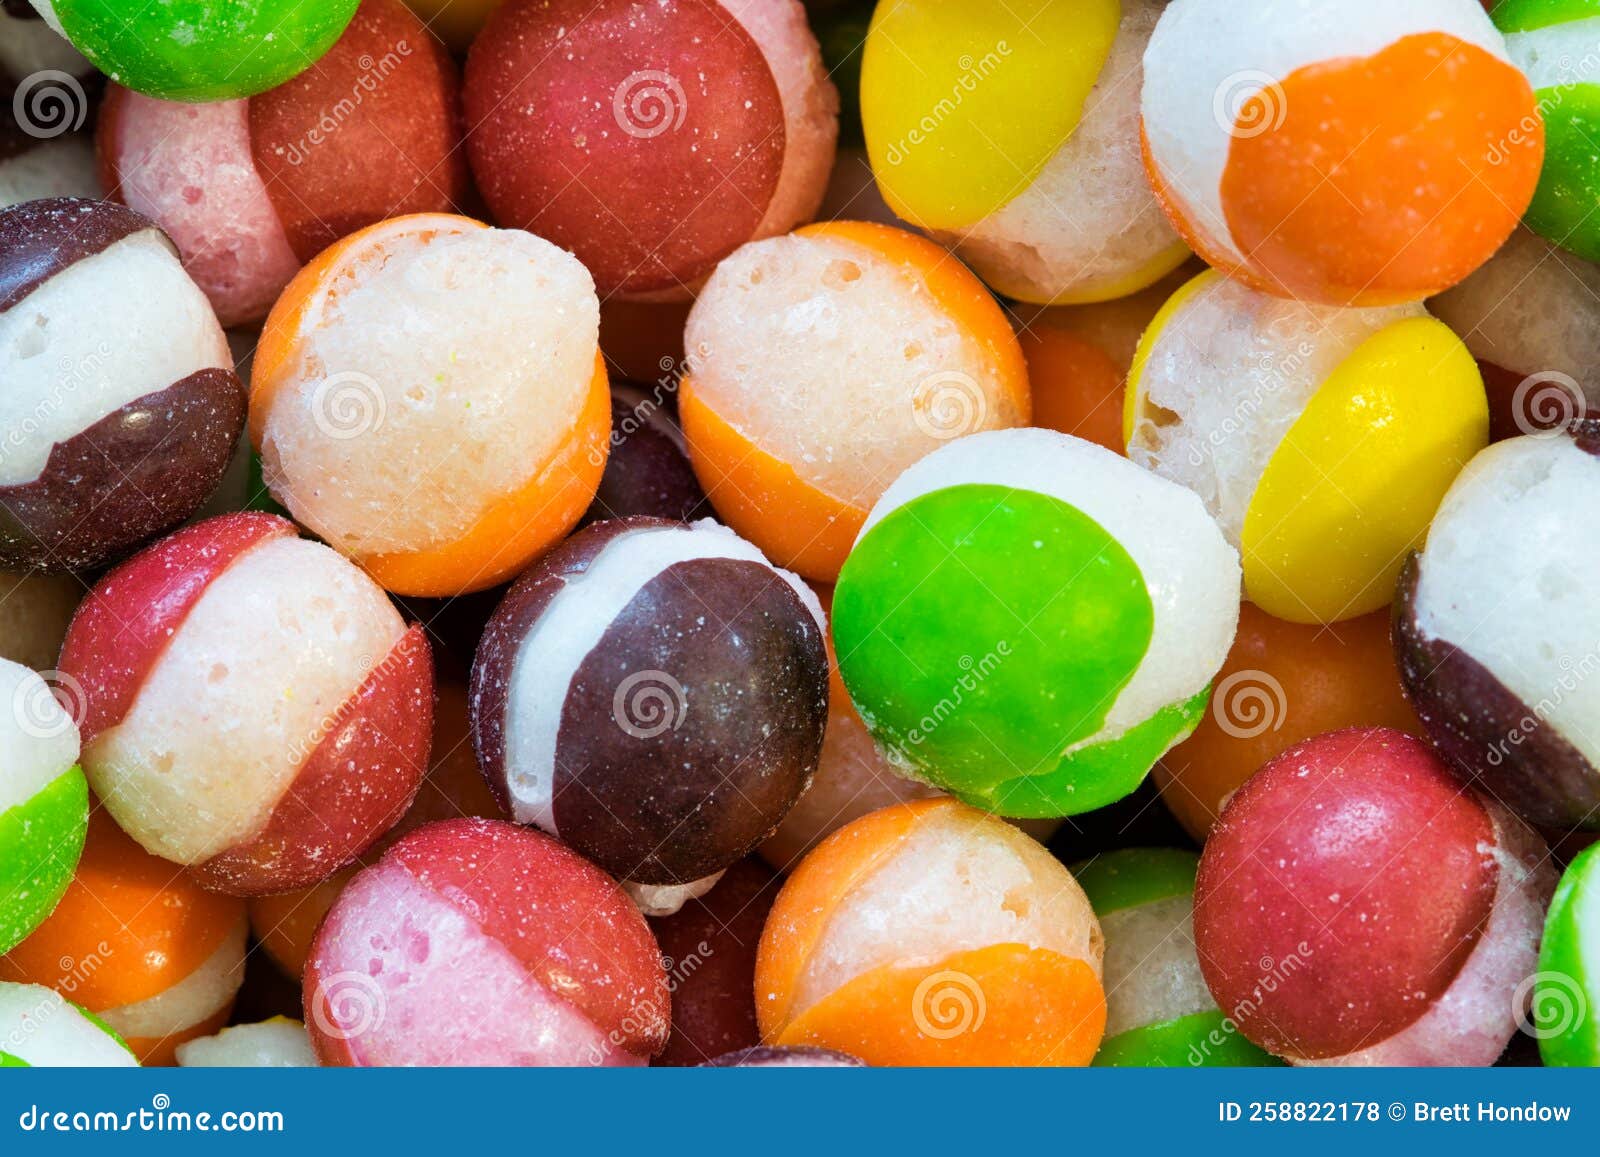 freeze dried skittles hard candy macro with splits through their centers.